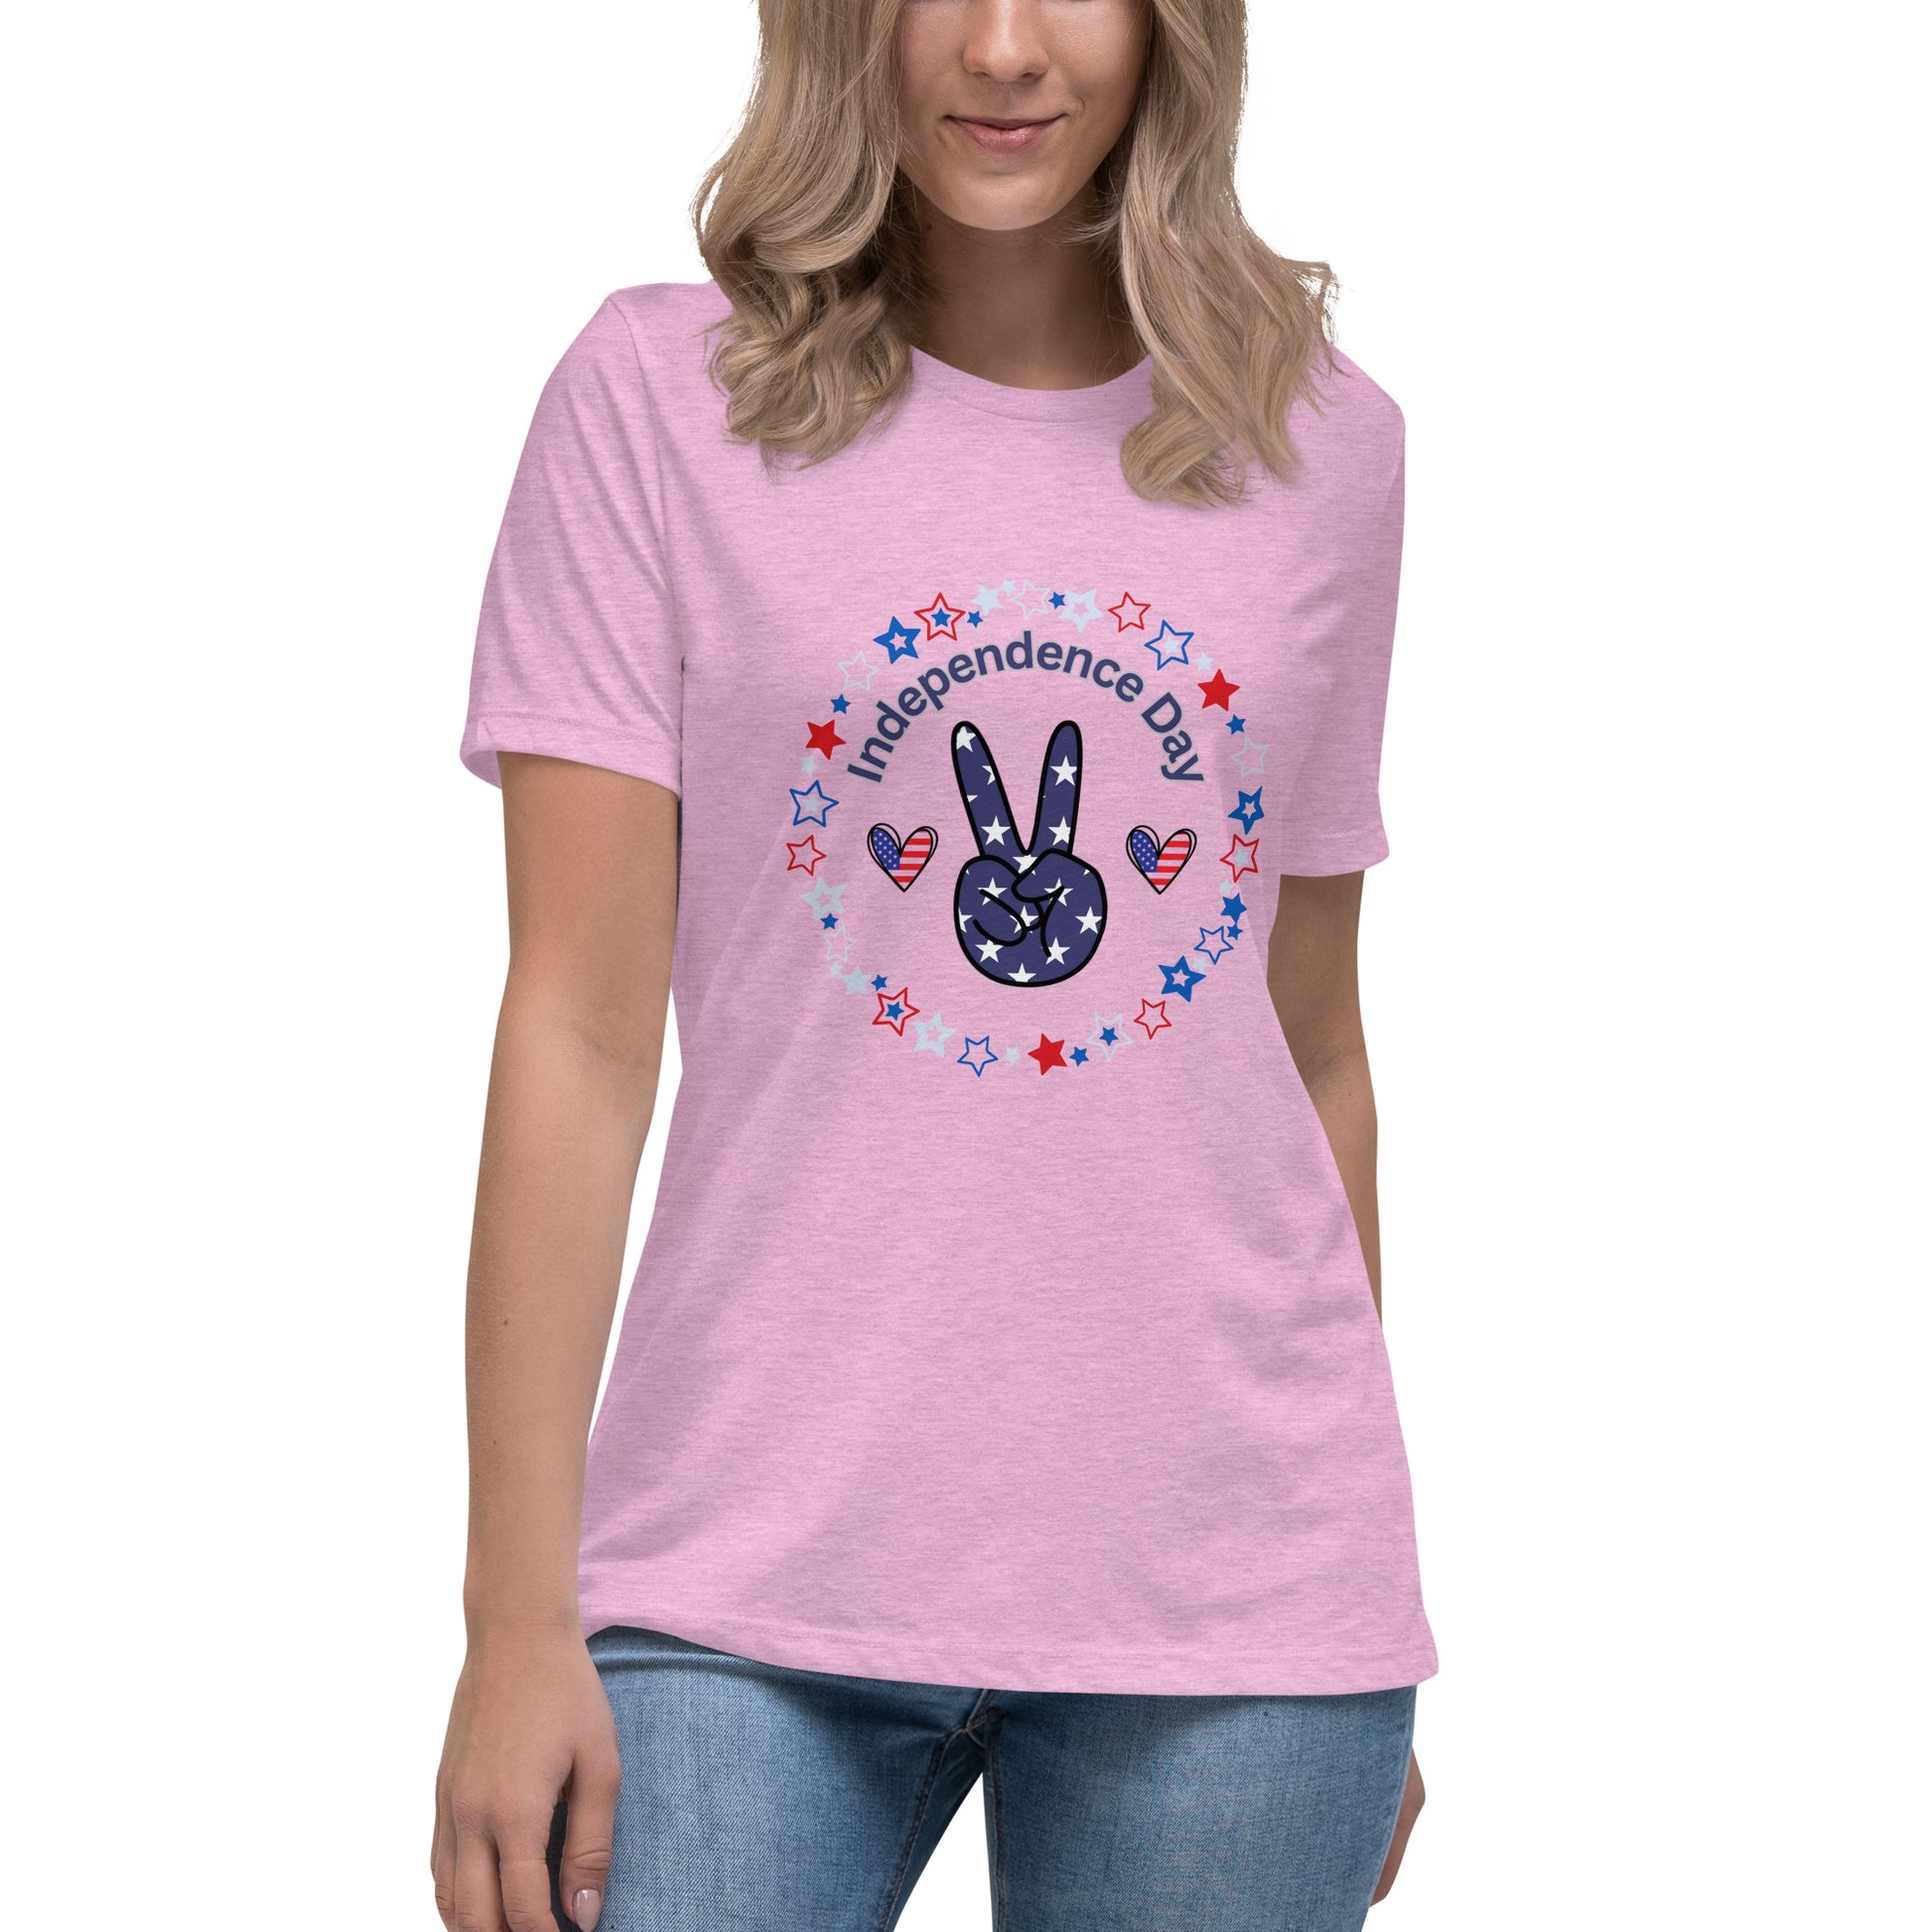 Women's Relaxed T-Shirt - Independence Day 4th of July T-shirt Stylin' Spirit Heather Prism Lilac S 